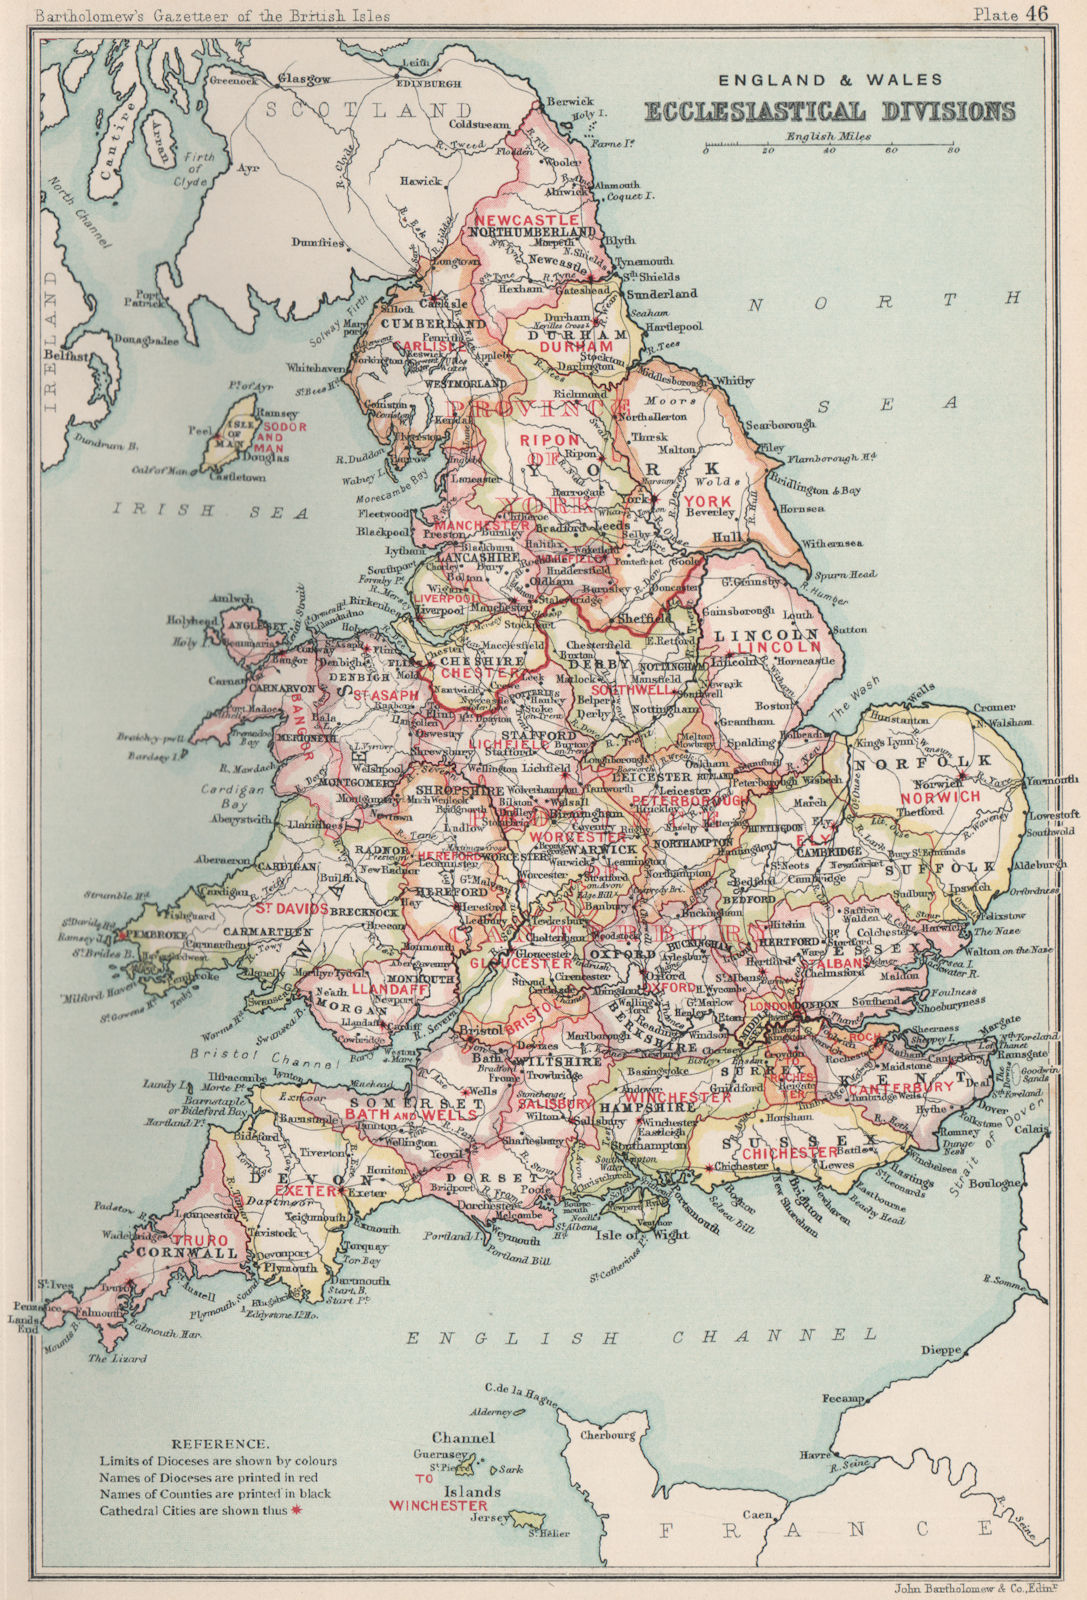 Associate Product England & Wales. Ecclesiastical divisions. Religious church. Dioceses 1904 map